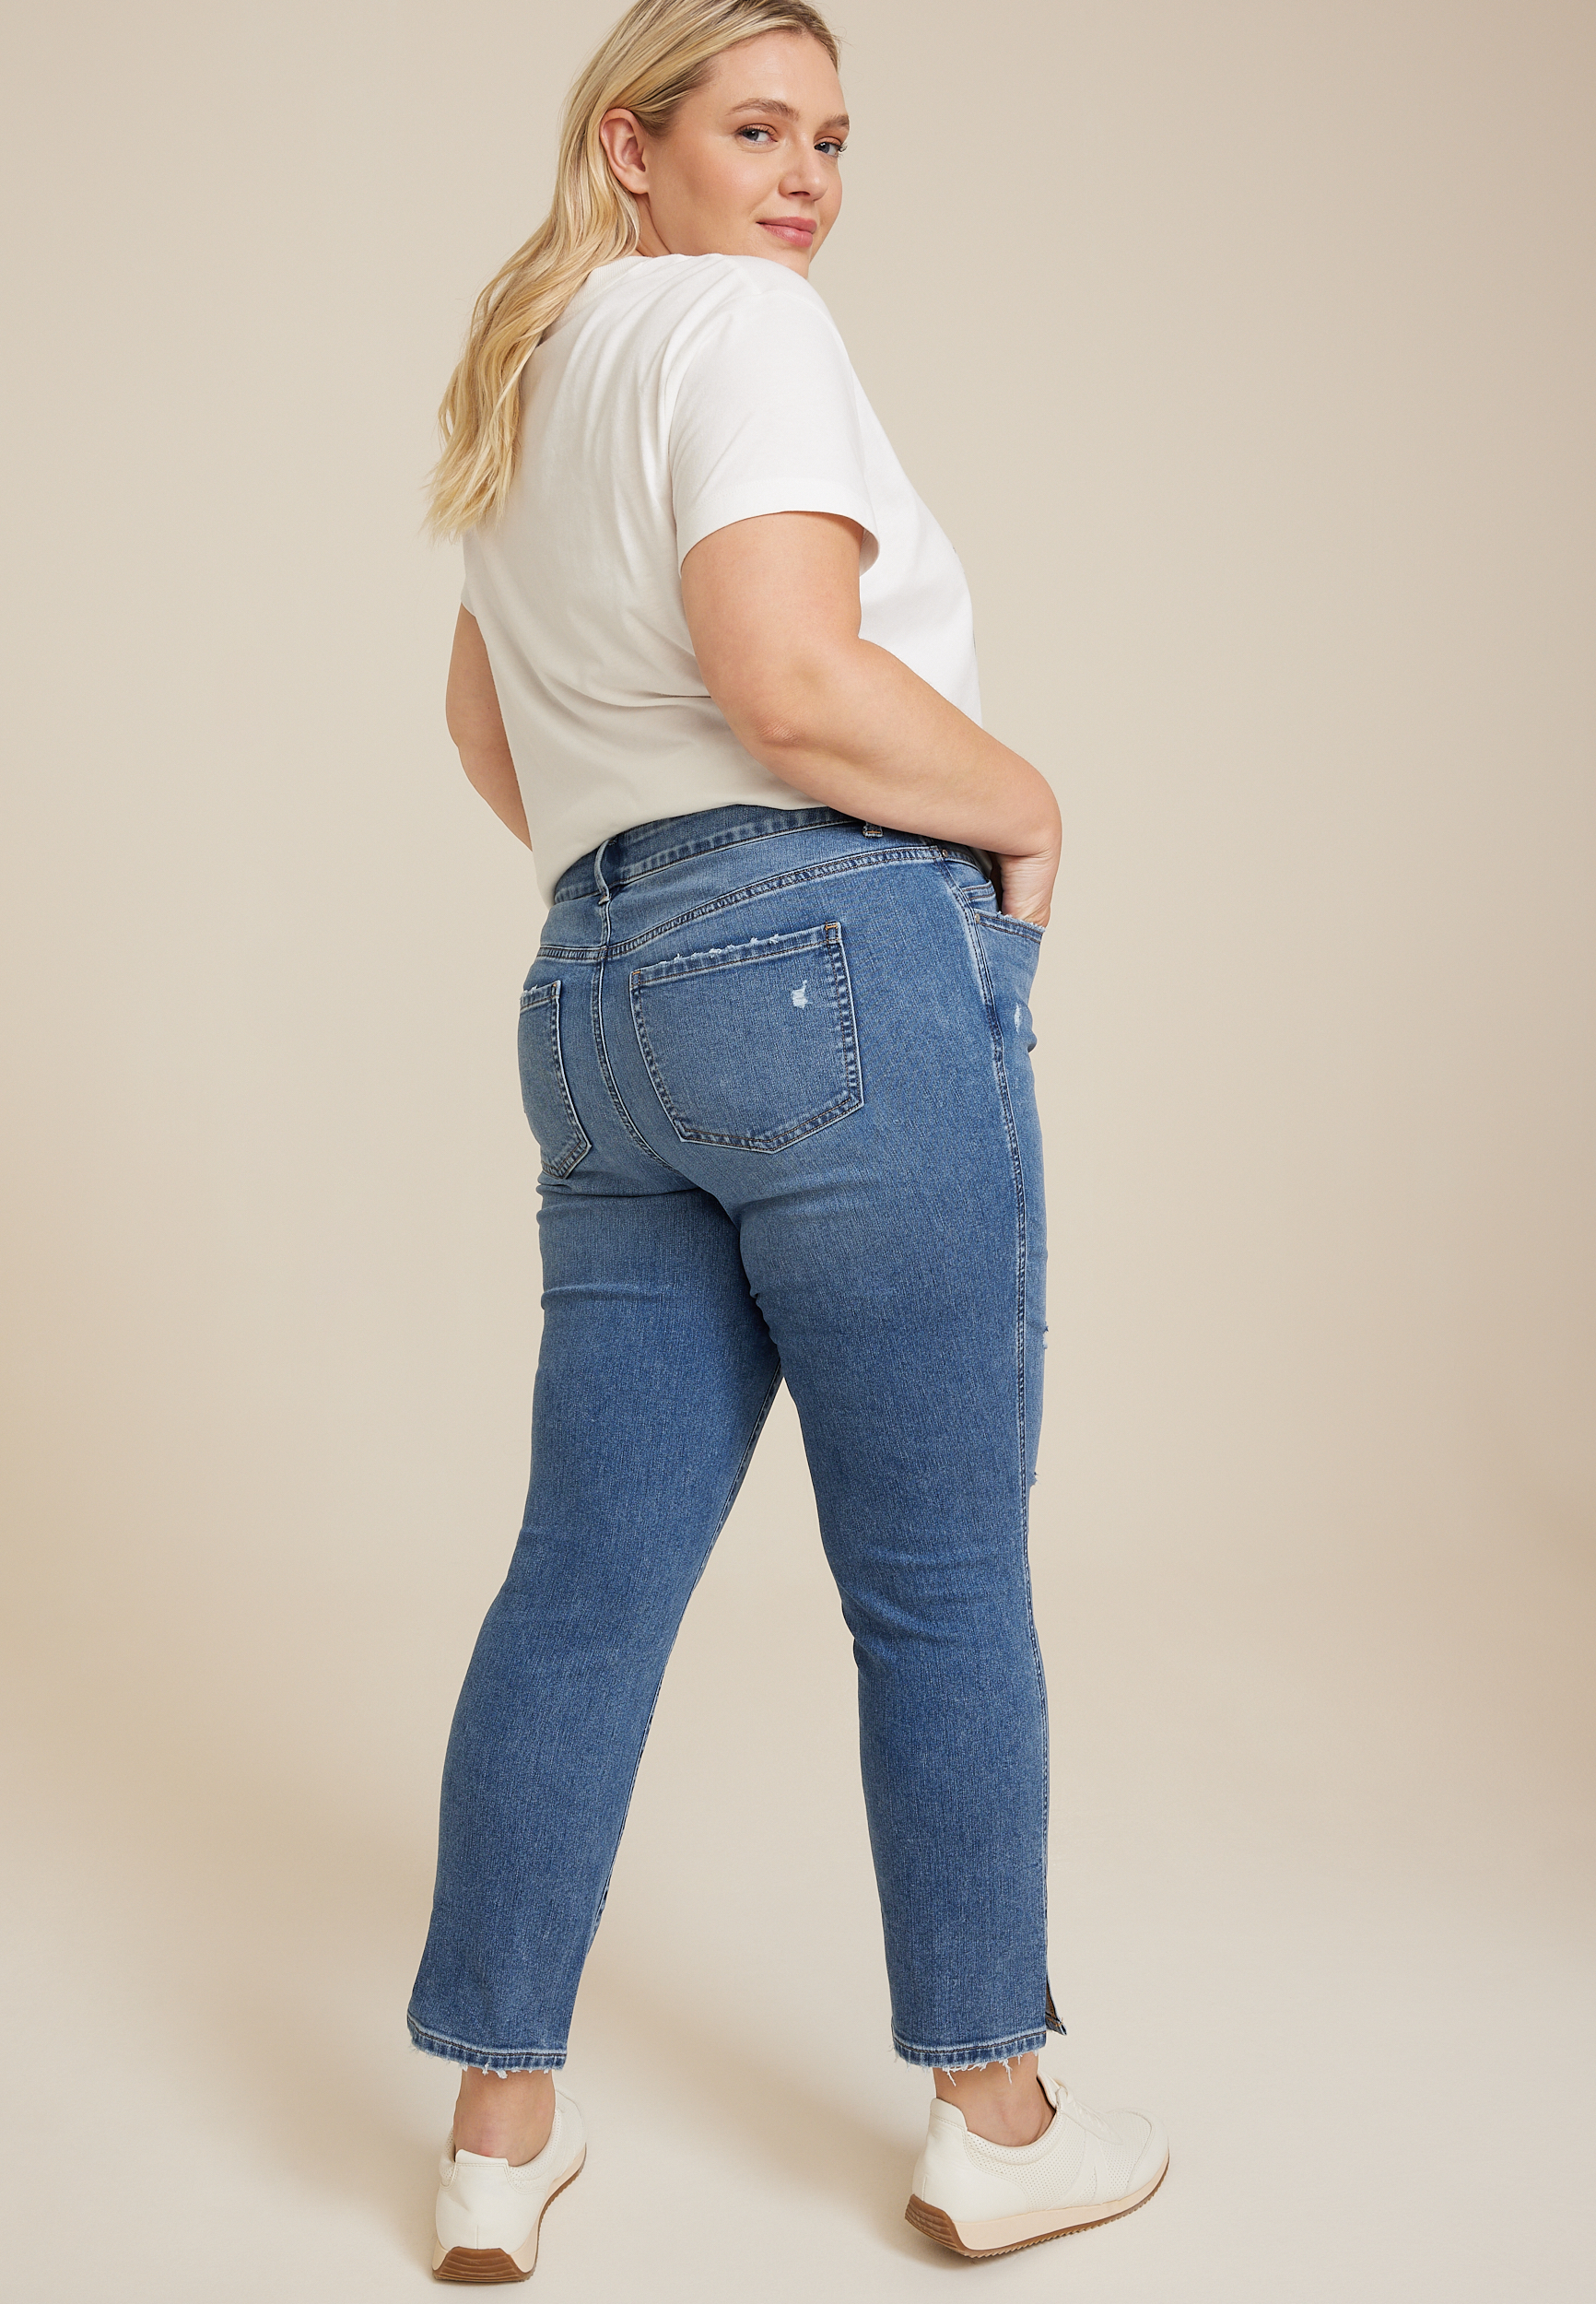 Plus Size m jeans by maurices™ Everflex™ High Rise Slim Straight Ankle Jean